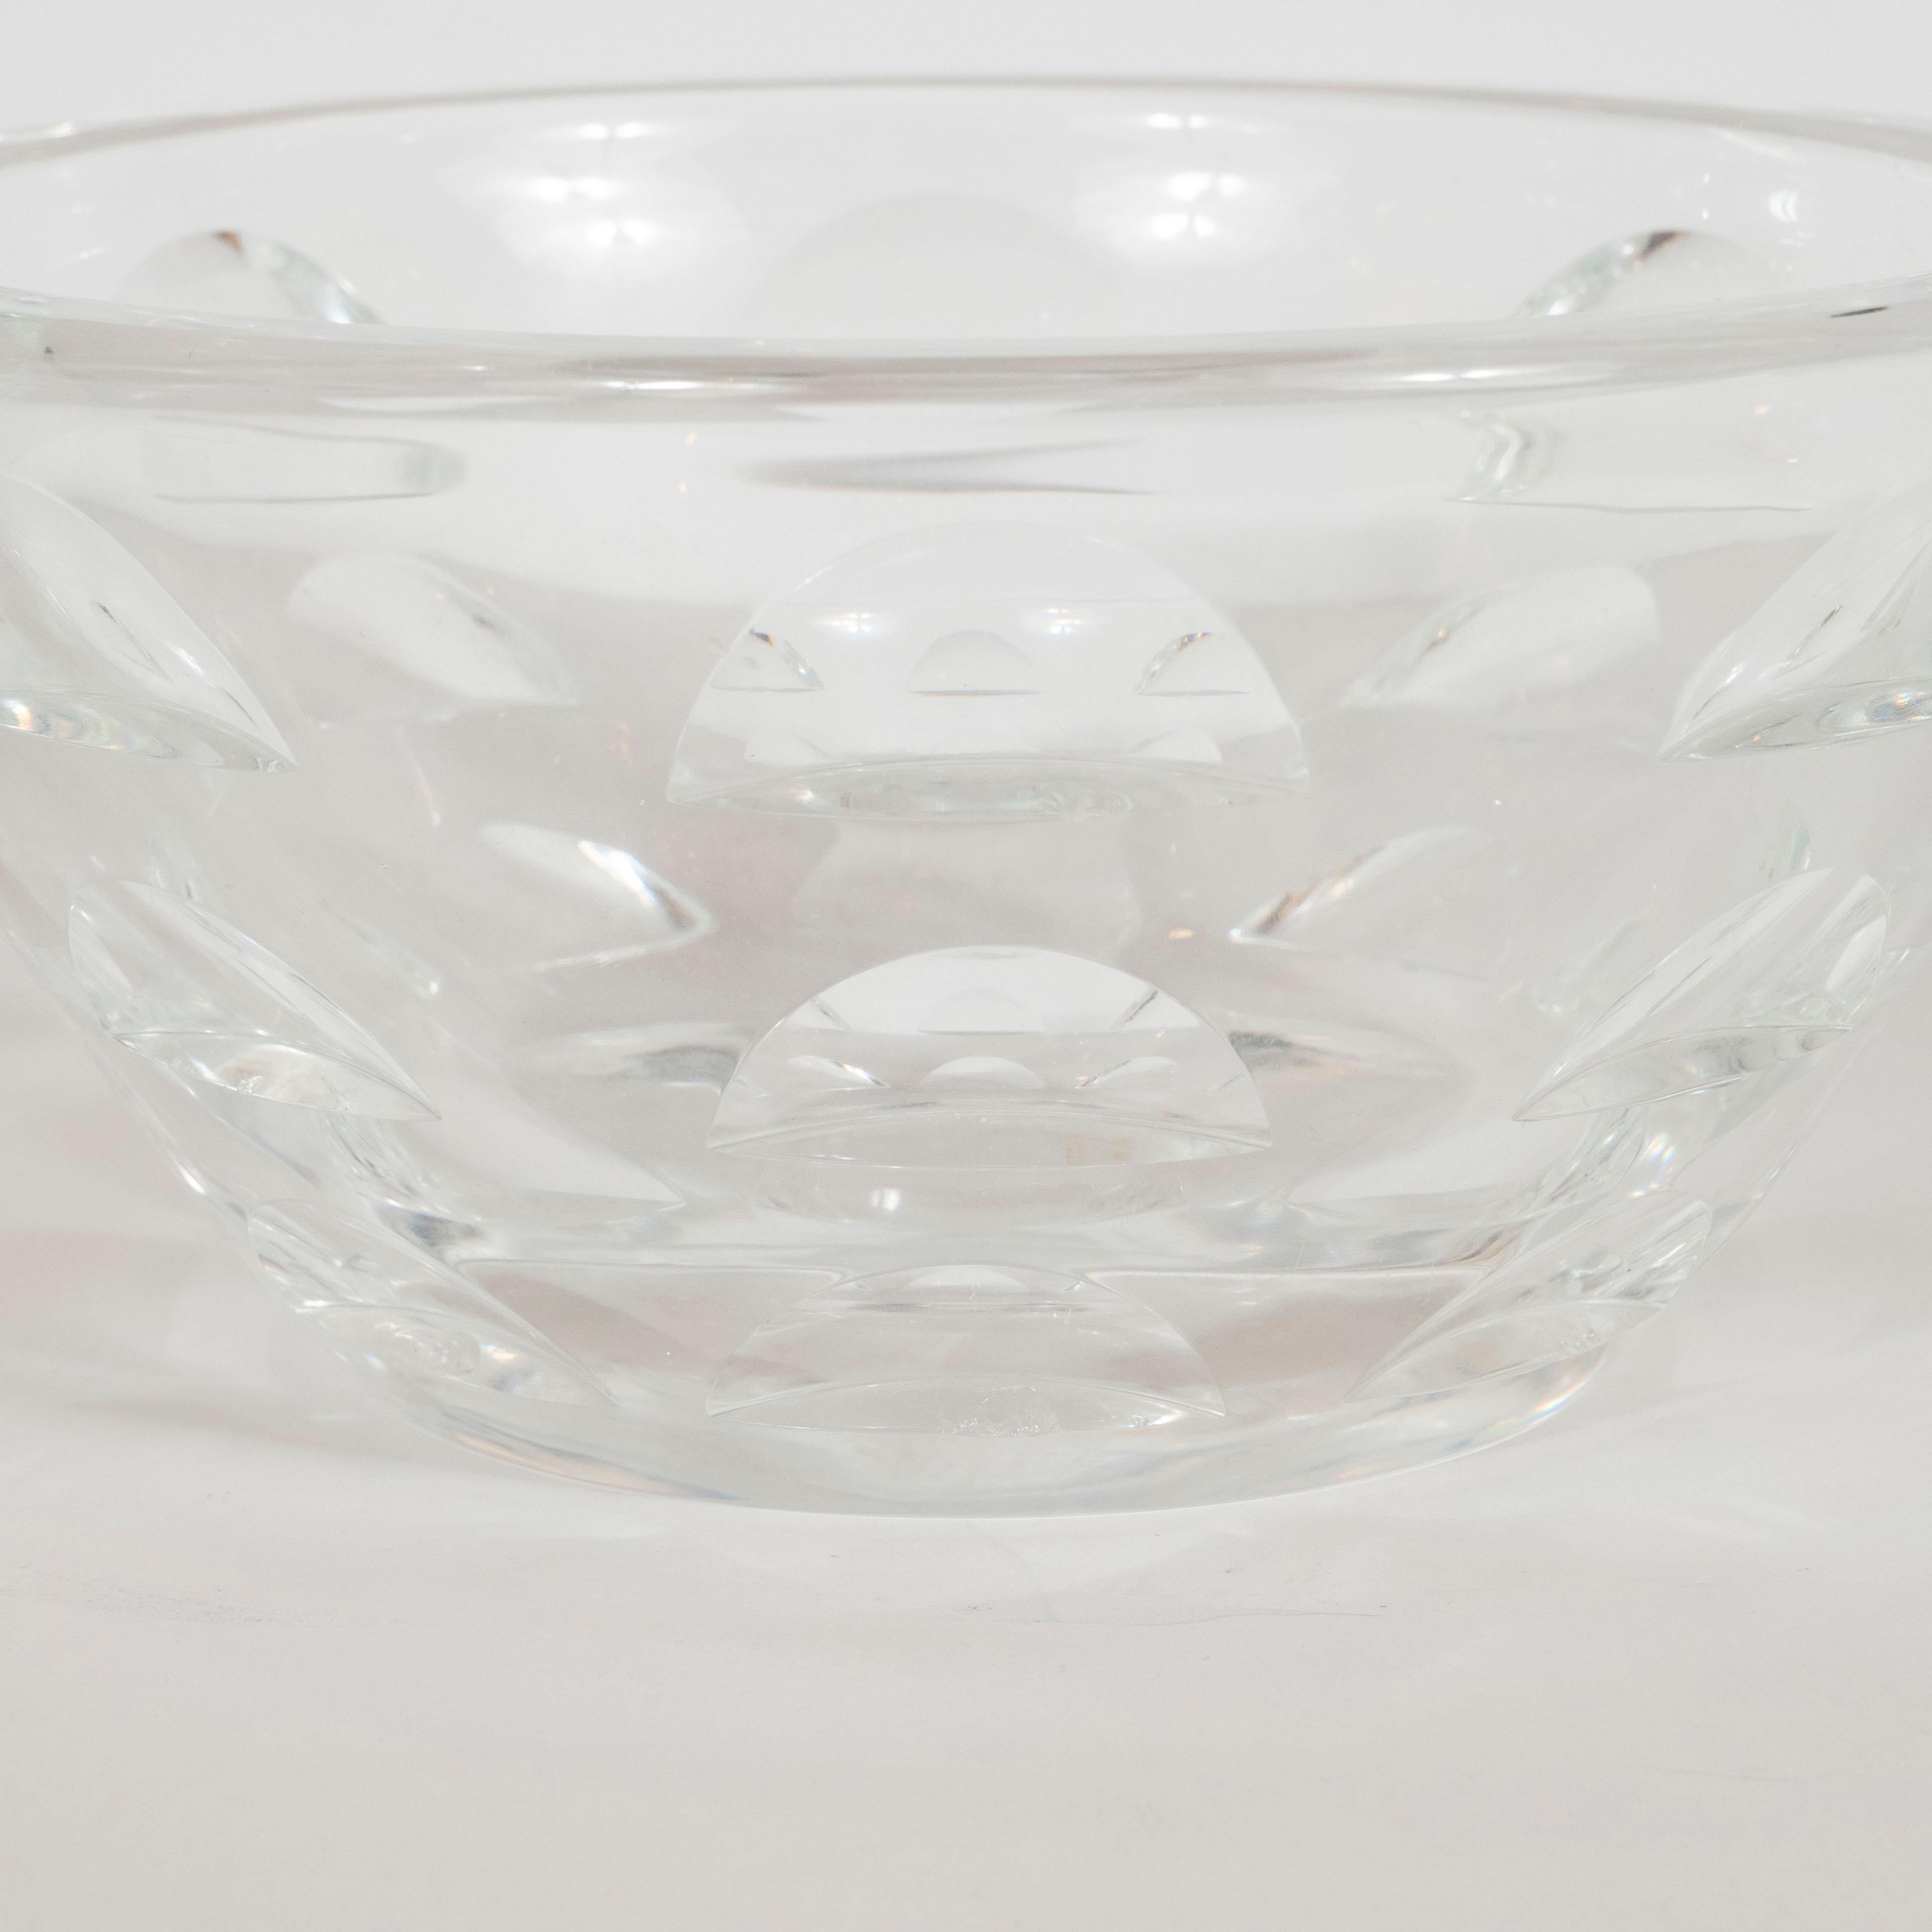 This refined and elegant Art Deco Machine Age bowl was realized by the celebrated American maker, Steuben, circa 1930. It features a conical form in translucent glass with a wealth of incised streamlined forms- a leitmotif of the period. This piece